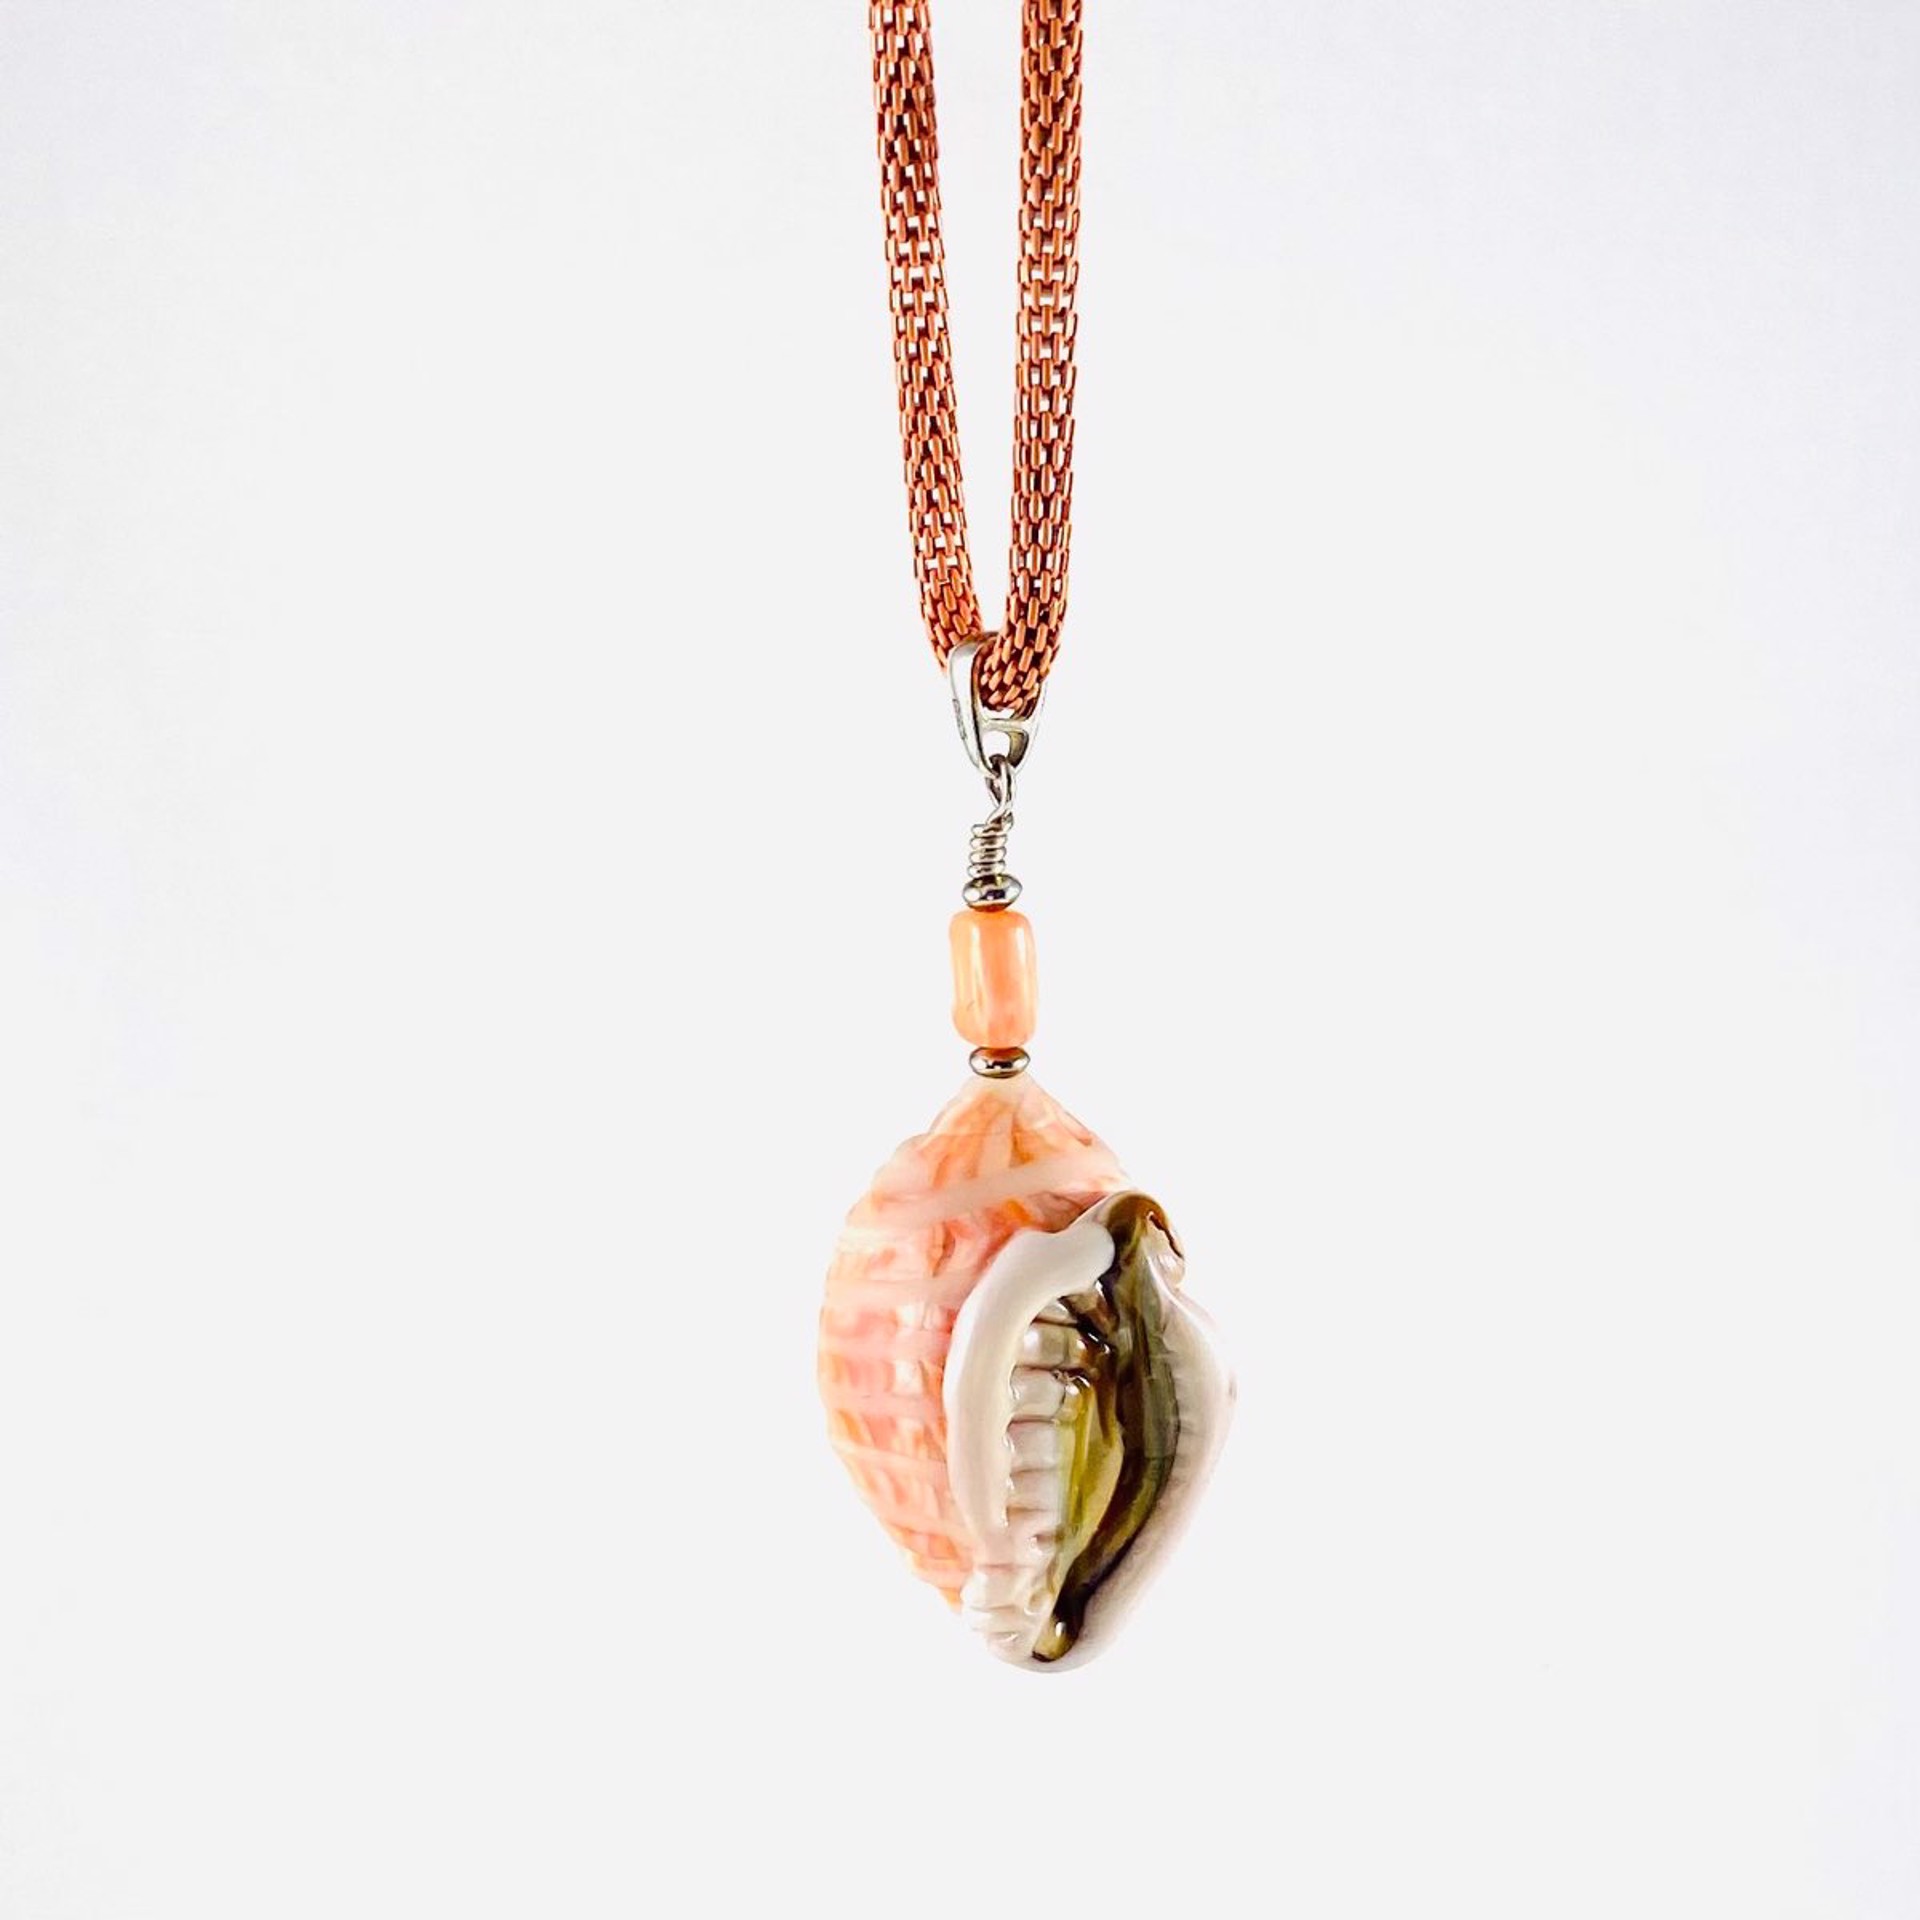 Coral and Ivory Shell Pendant on Coral Mesh Chain Necklace LS21-445N by Linda Sacra